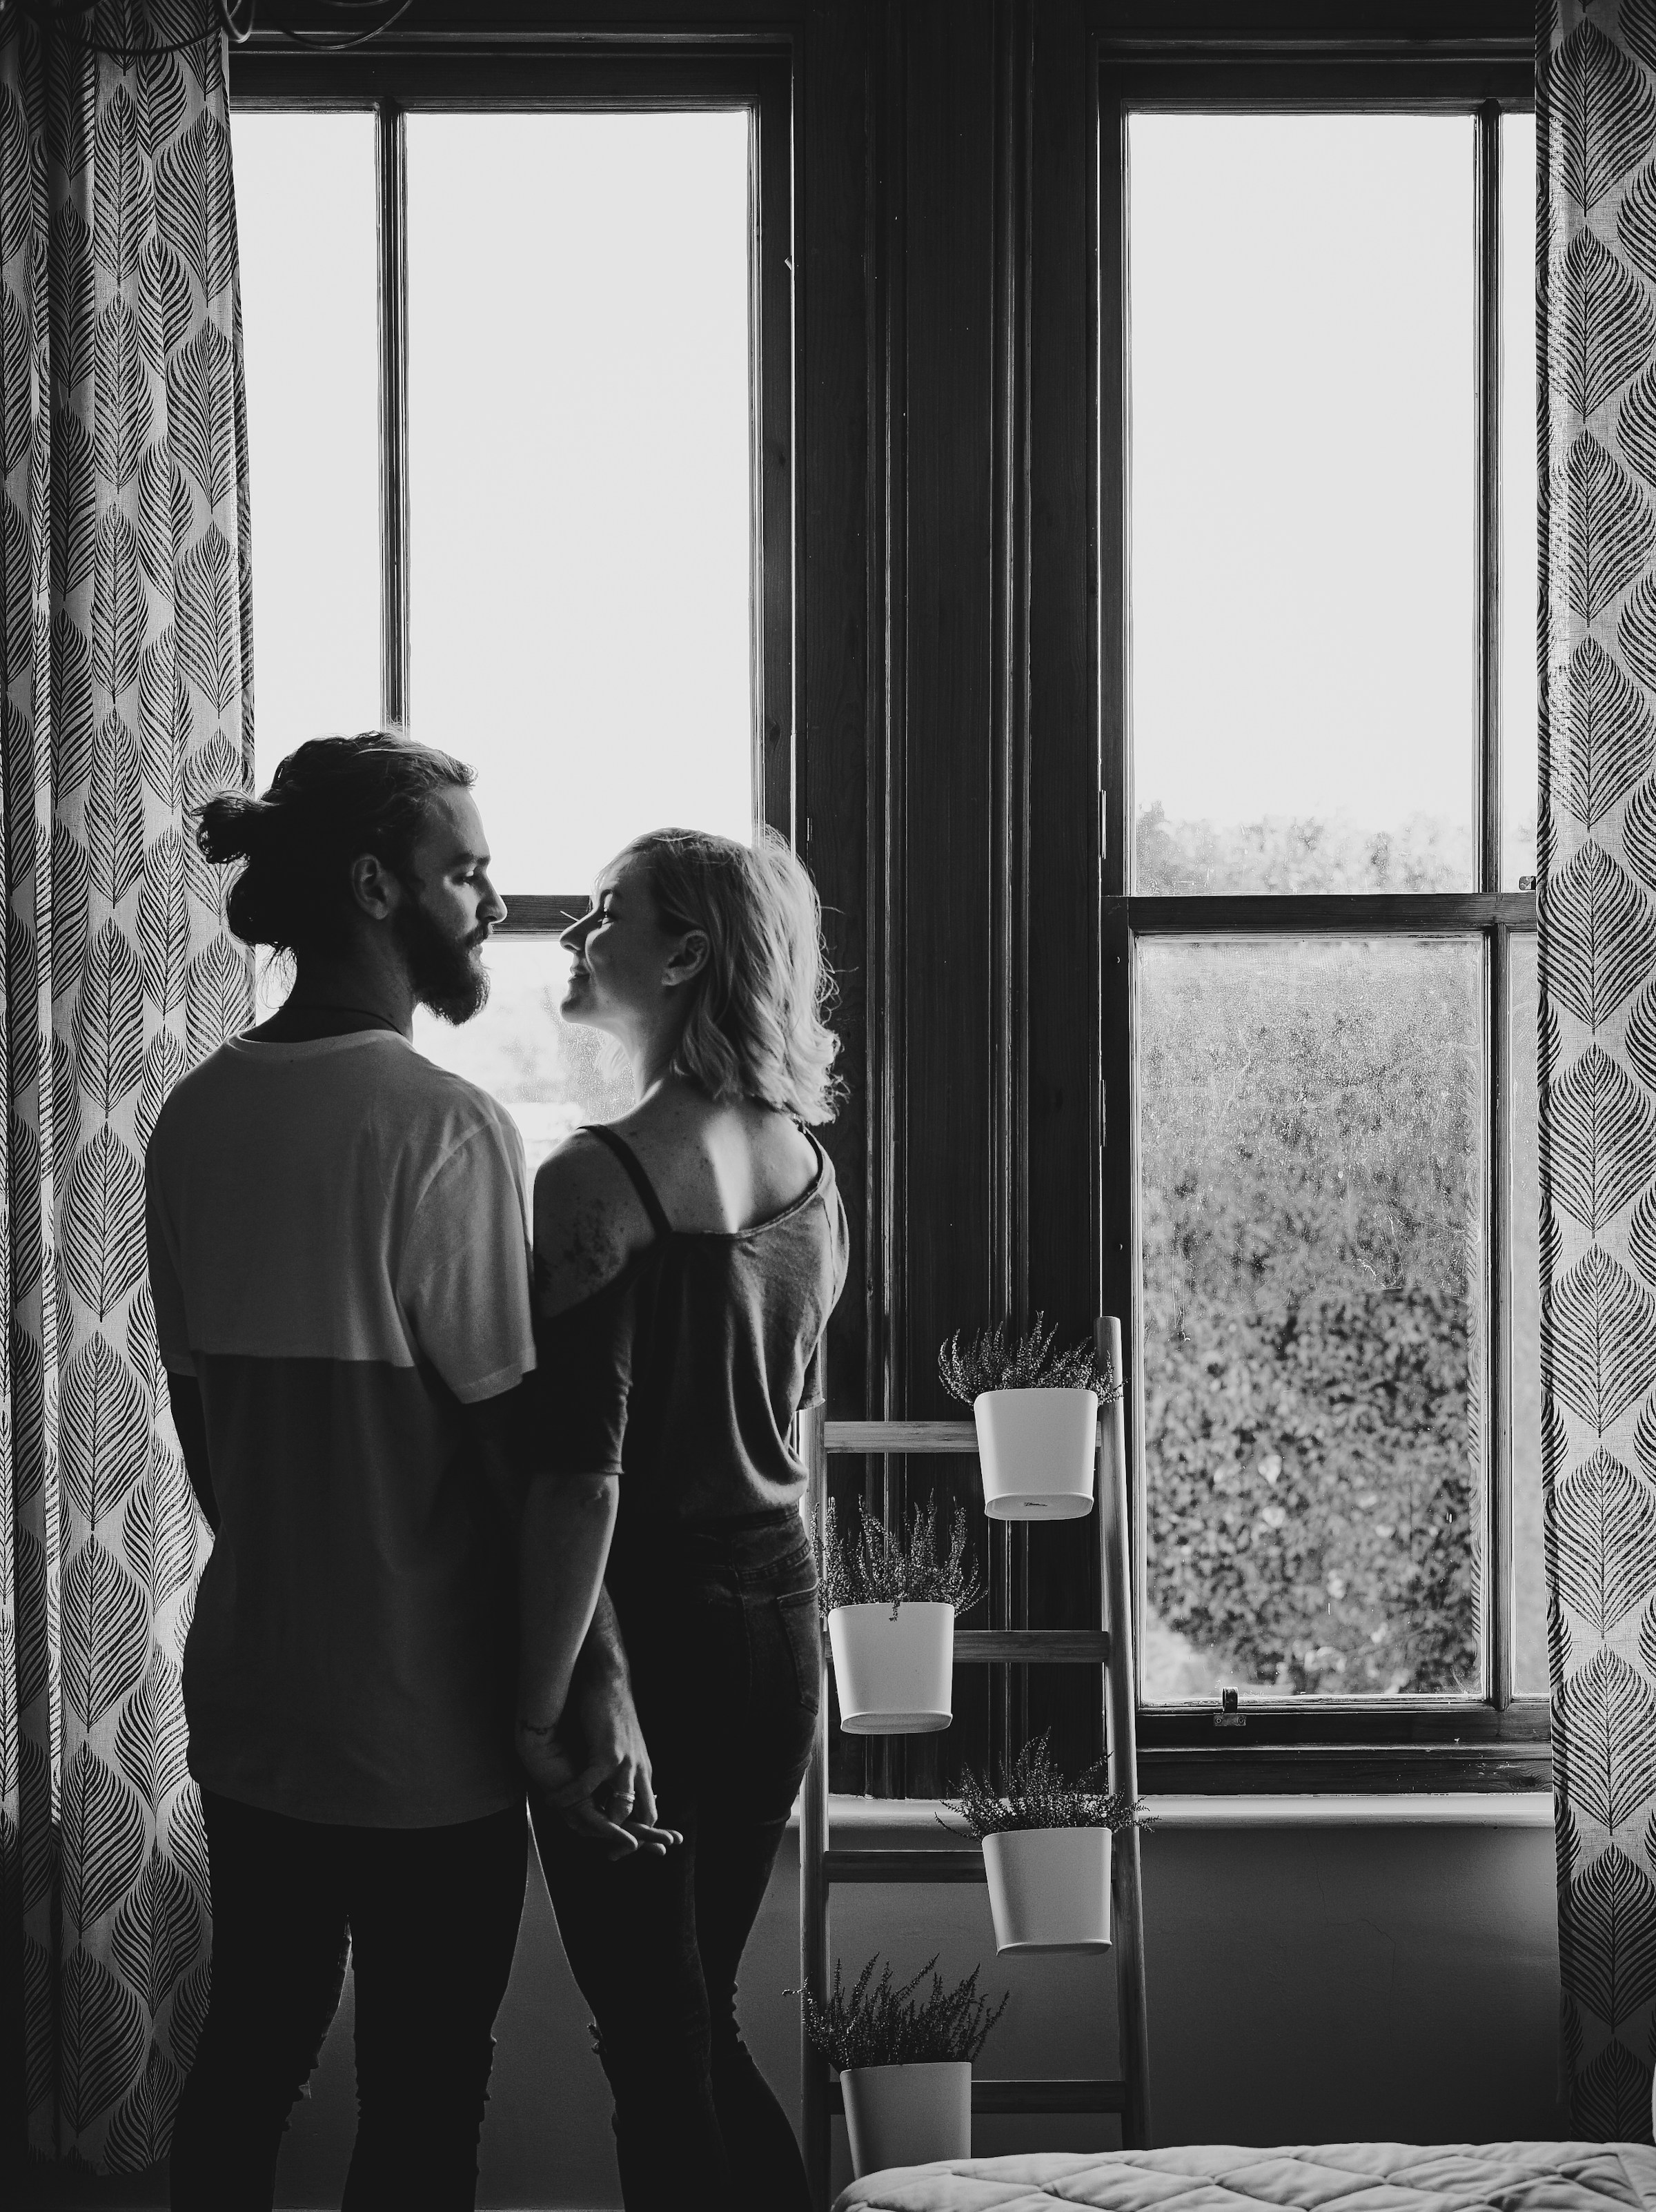 A smiling couple standing by a window | Source: Unsplash